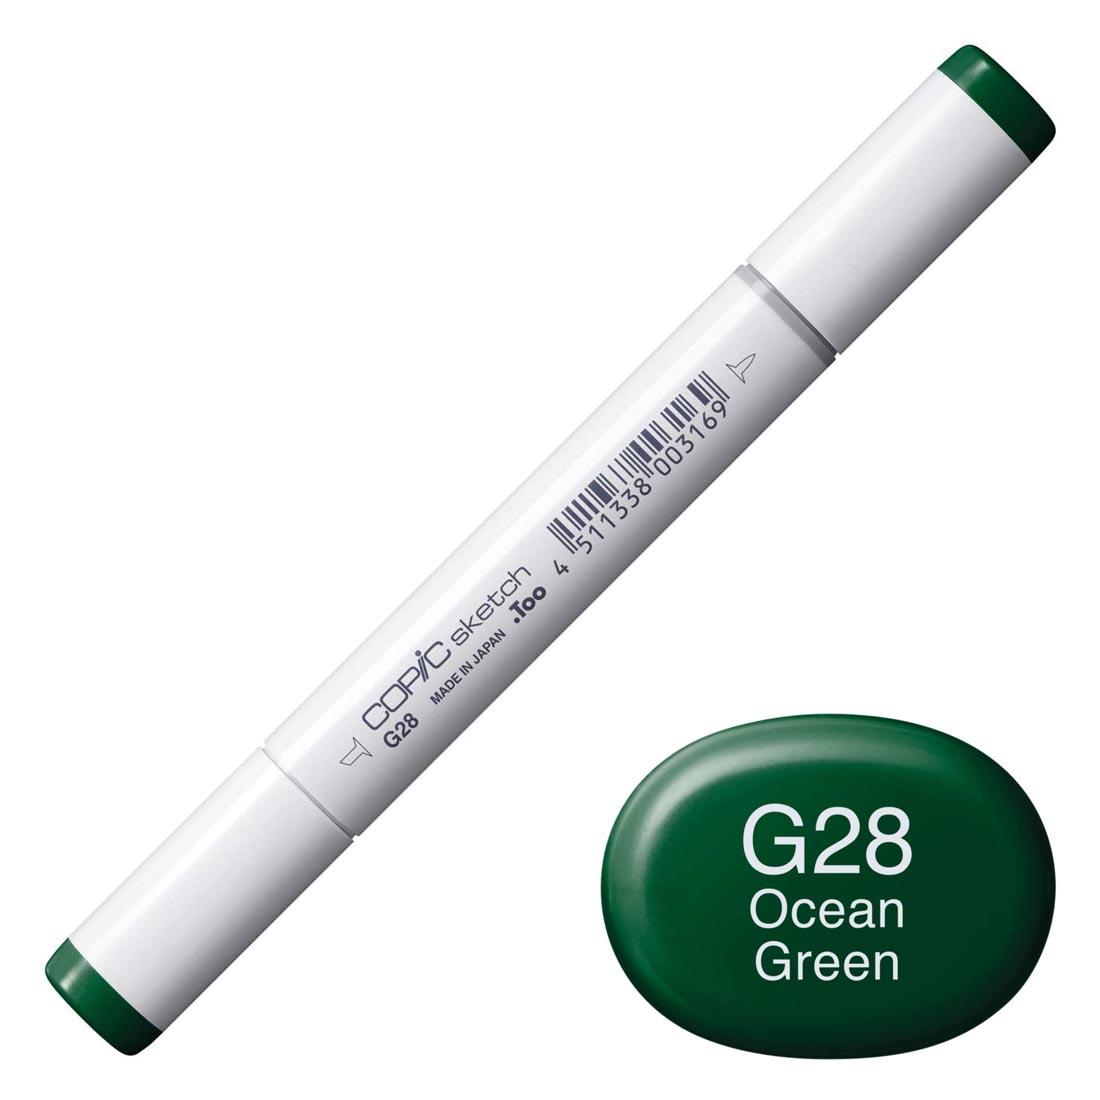 COPIC Sketch Marker with a color swatch and text of G28 Ocean Green